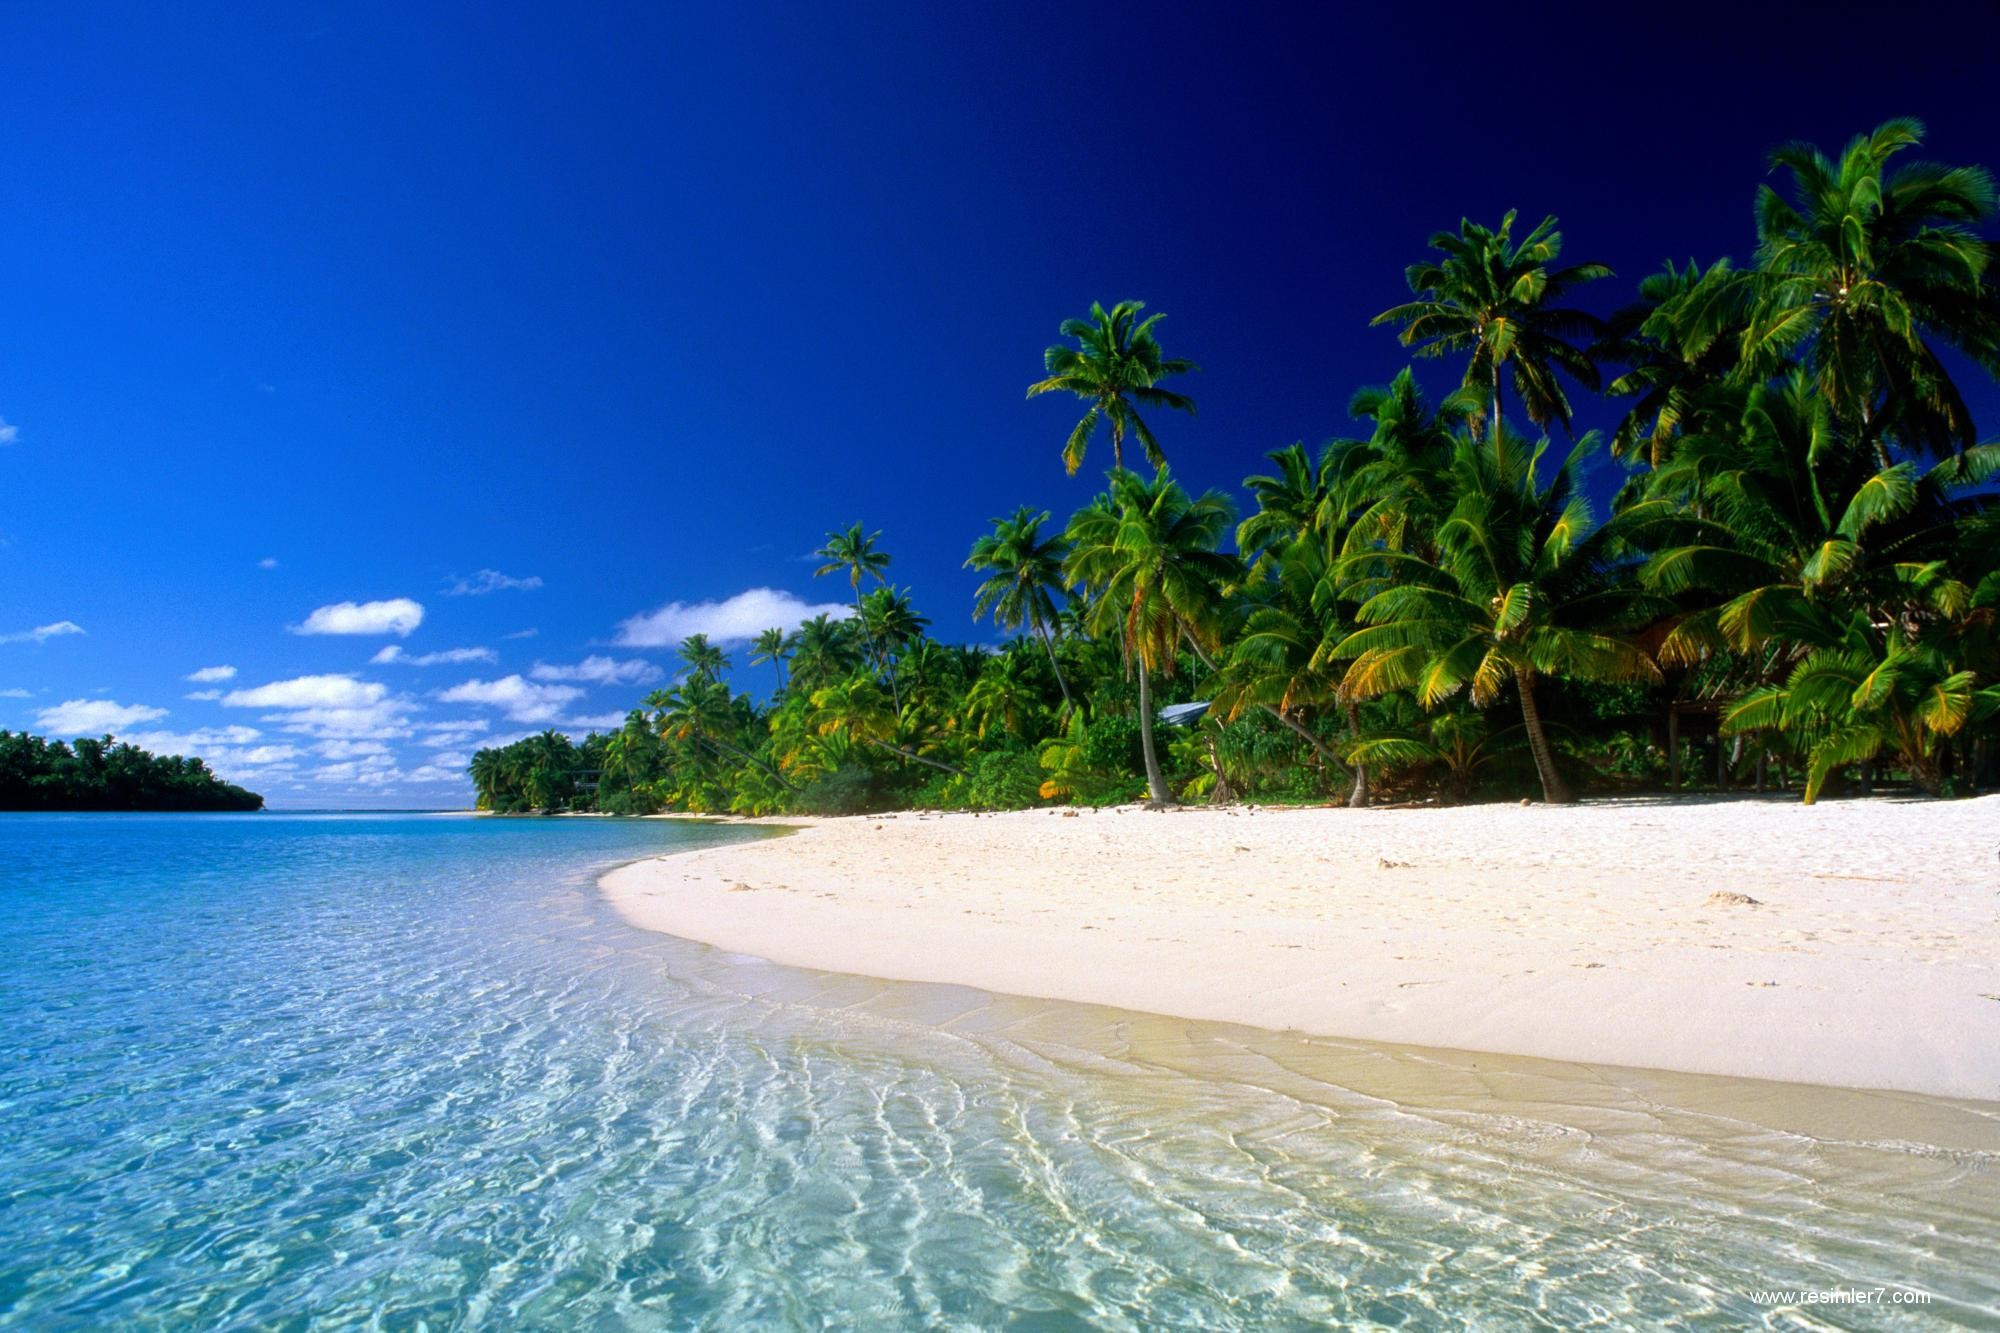 72 Beach Hd Wallpapers on WallpaperPlay